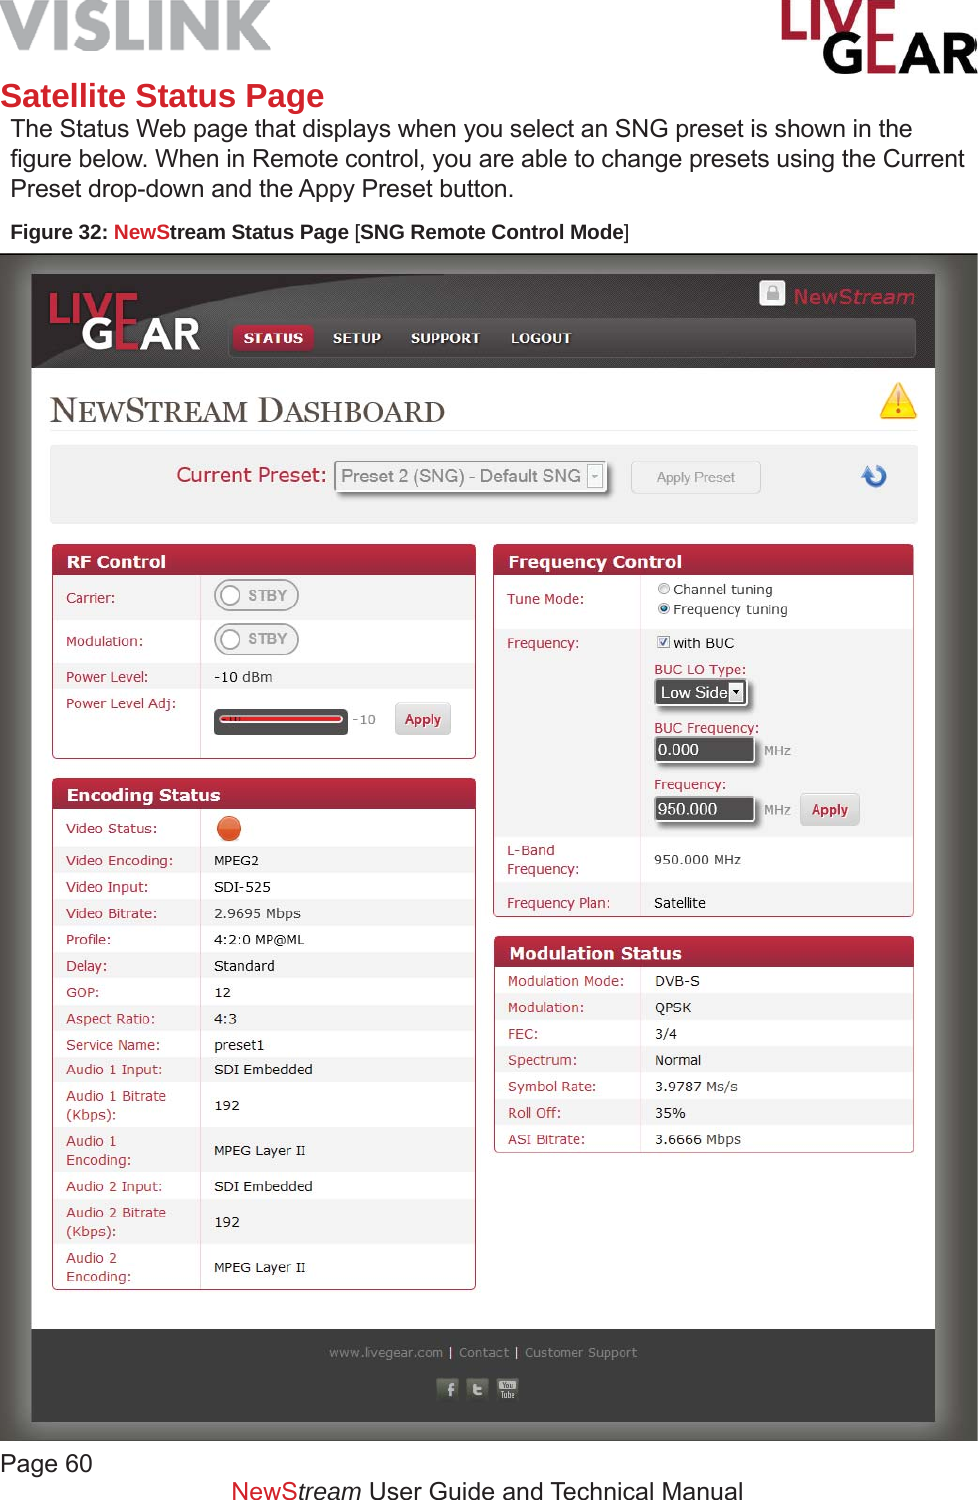 Page 60NewStream User Guide and Technical ManualSatellite Status PageThe Status Web page that displays when you select an SNG preset is shown in the ﬁ gure below. When in Remote control, you are able to change presets using the Current Preset drop-down and the Appy Preset button.  Figure 32: NewStream Status Page [SNG Remote Control Mode]